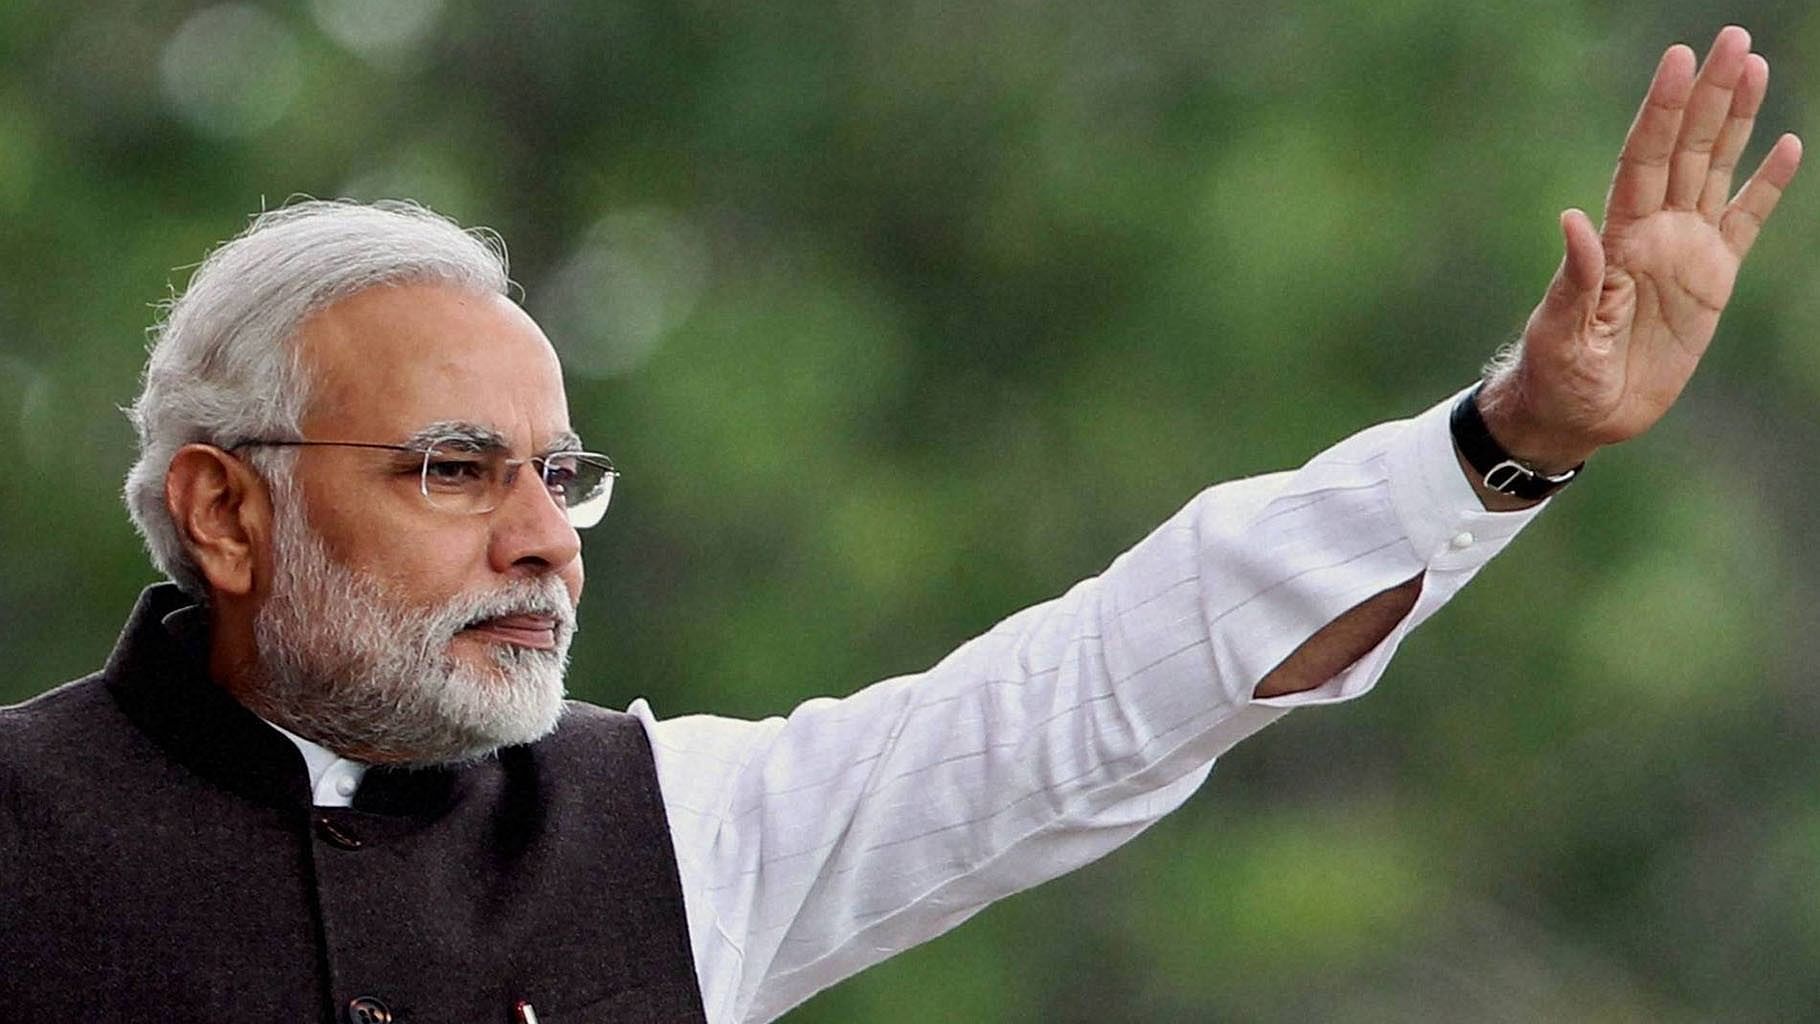 Prime Minister Narendra Modi will meet leading economists and sectoral experts at Niti Aayog on 10 January.